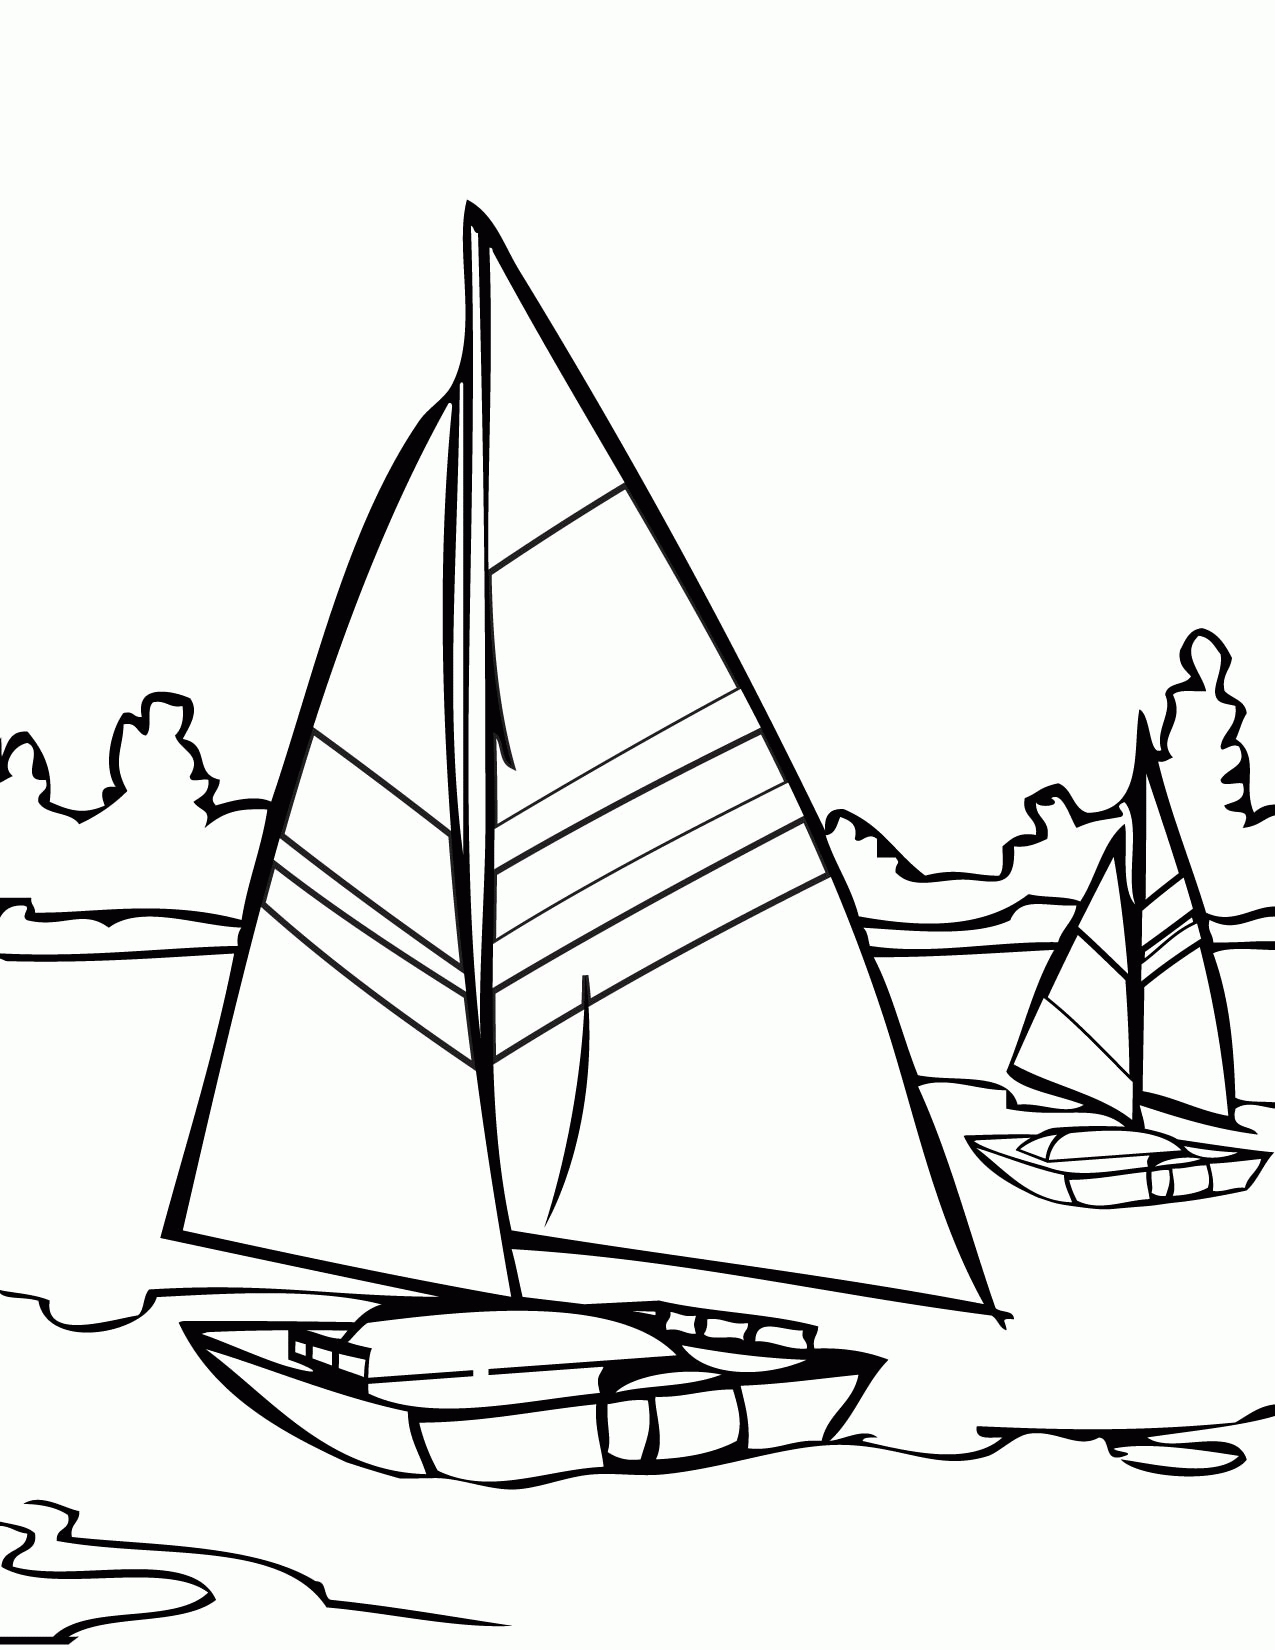 Sailboat Coloring Page Coloring Home